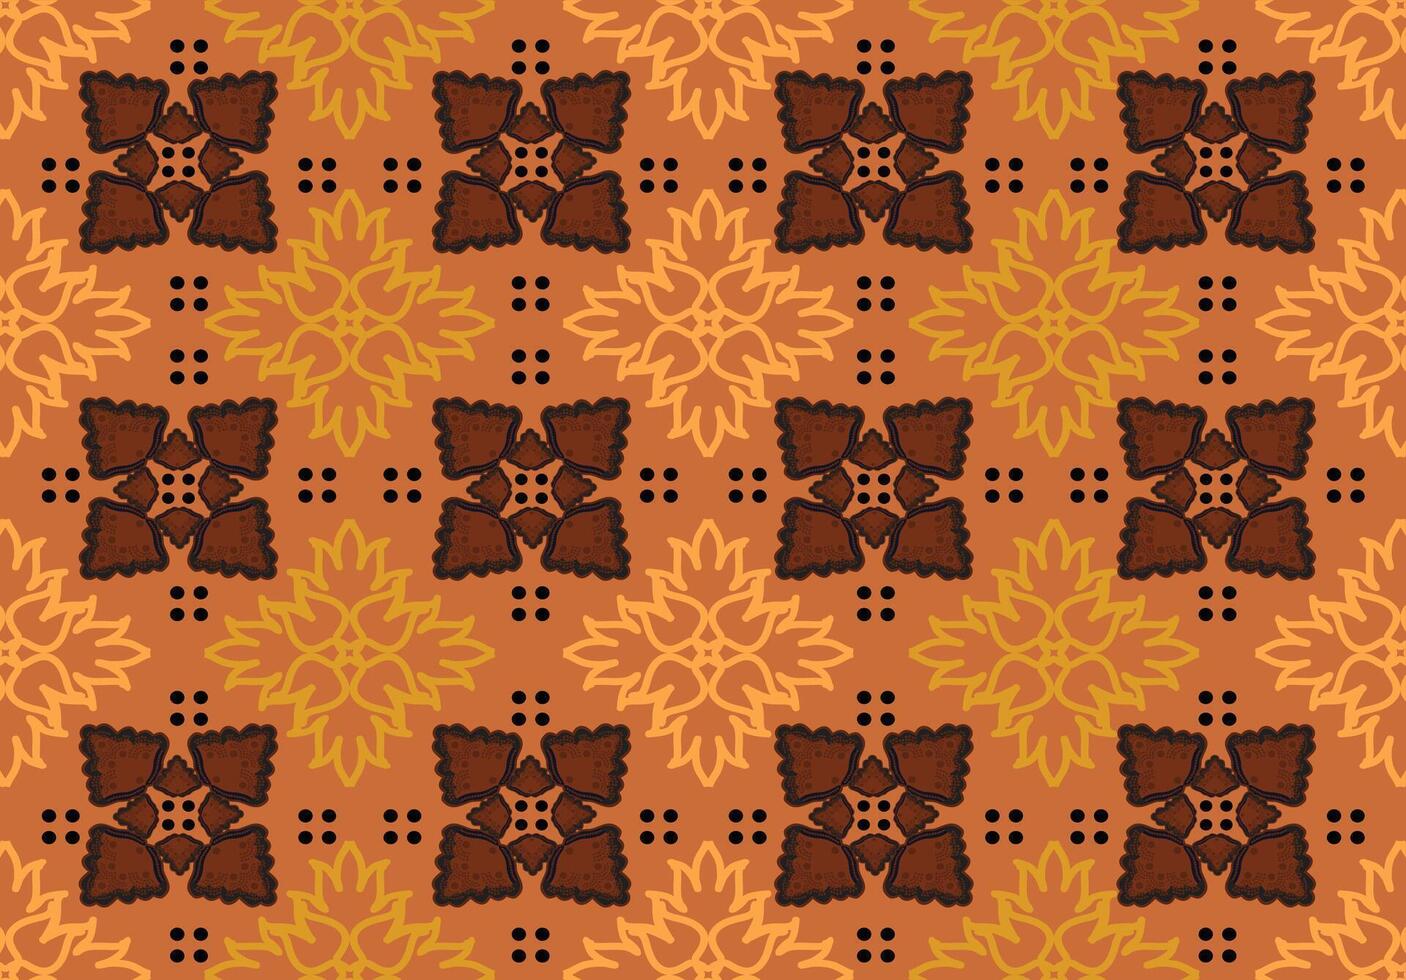 Indonesian batik motifs with very distinctive, exclusive plant patterns. EPS 10 vector